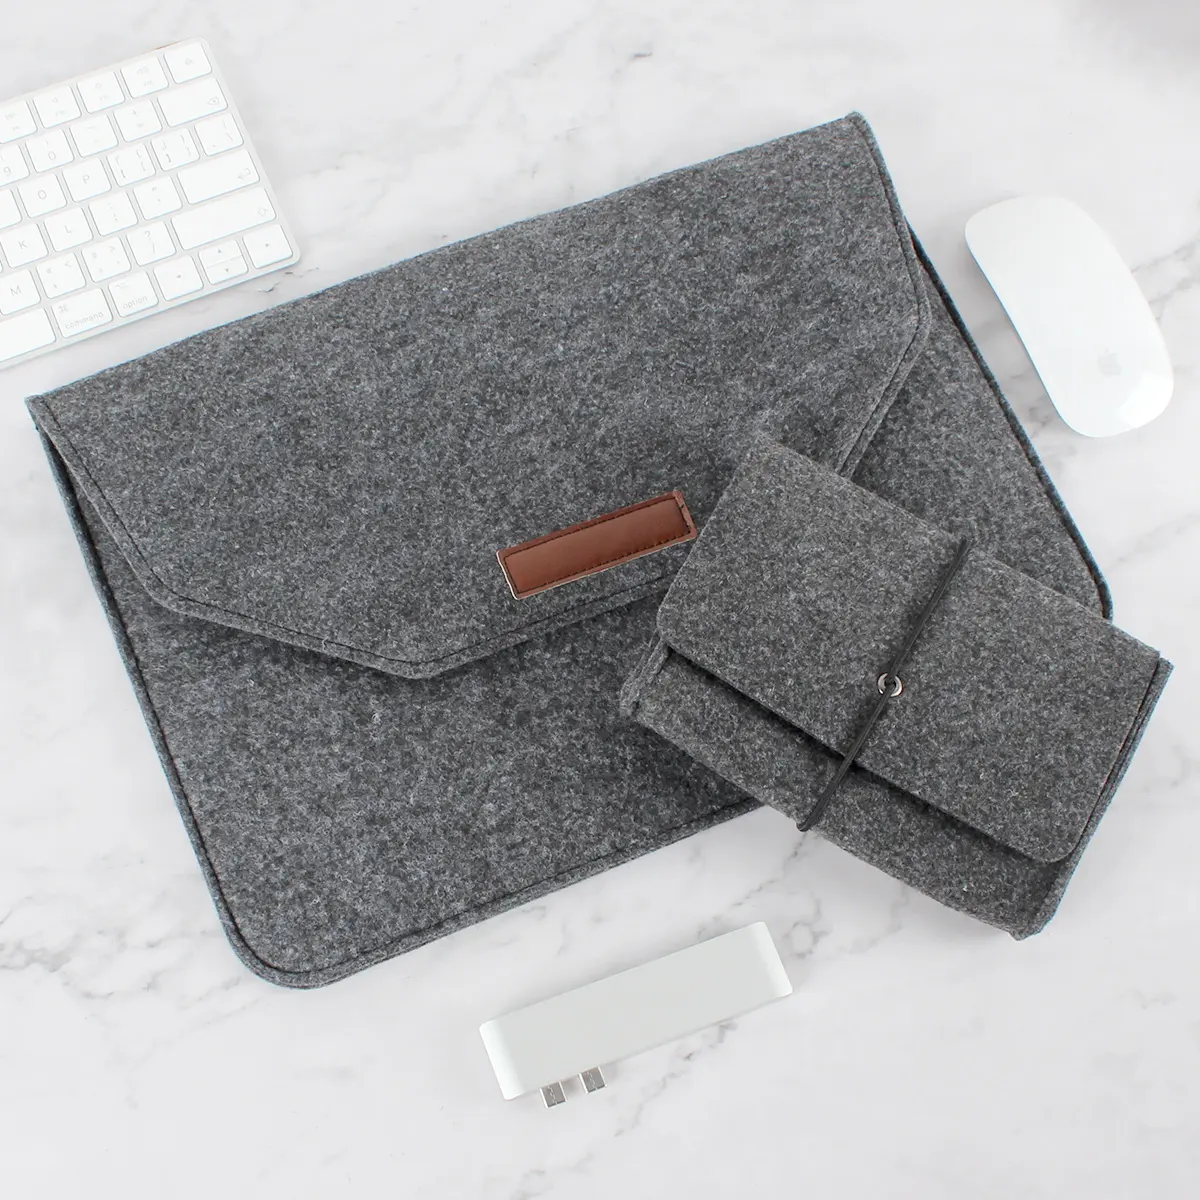 Dropshipping Amazon Wholesale For Macbook 11/12/13/14/15/16 Inch Sleeve Wool Felt Laptop Case Document Bag